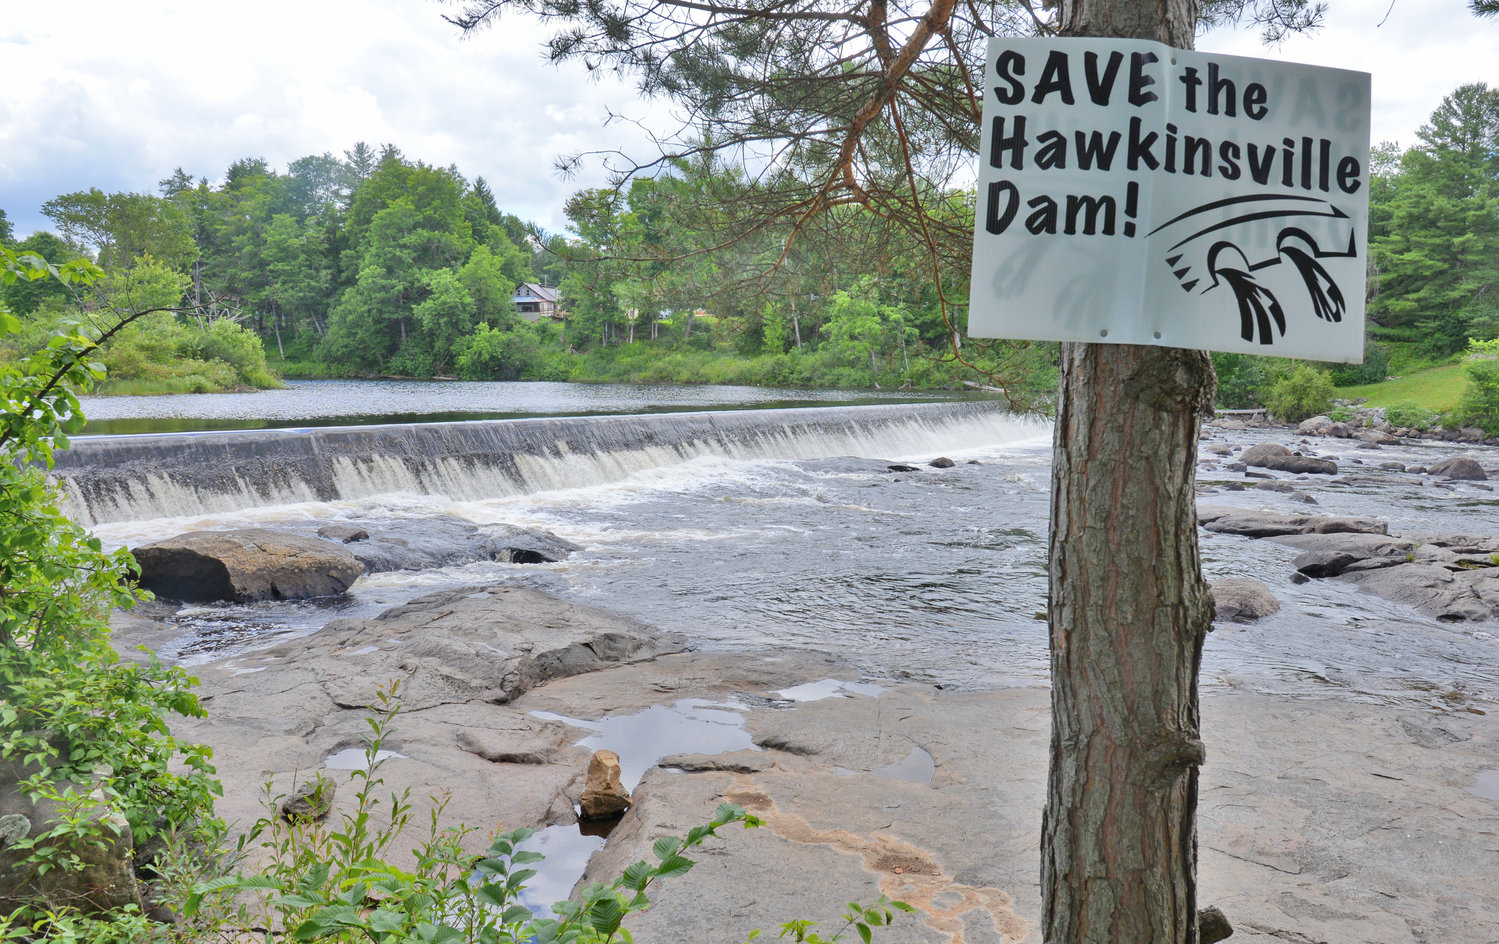 For years, signs have pointed to community support to restore the Hawkinsville Dam in Boonville.